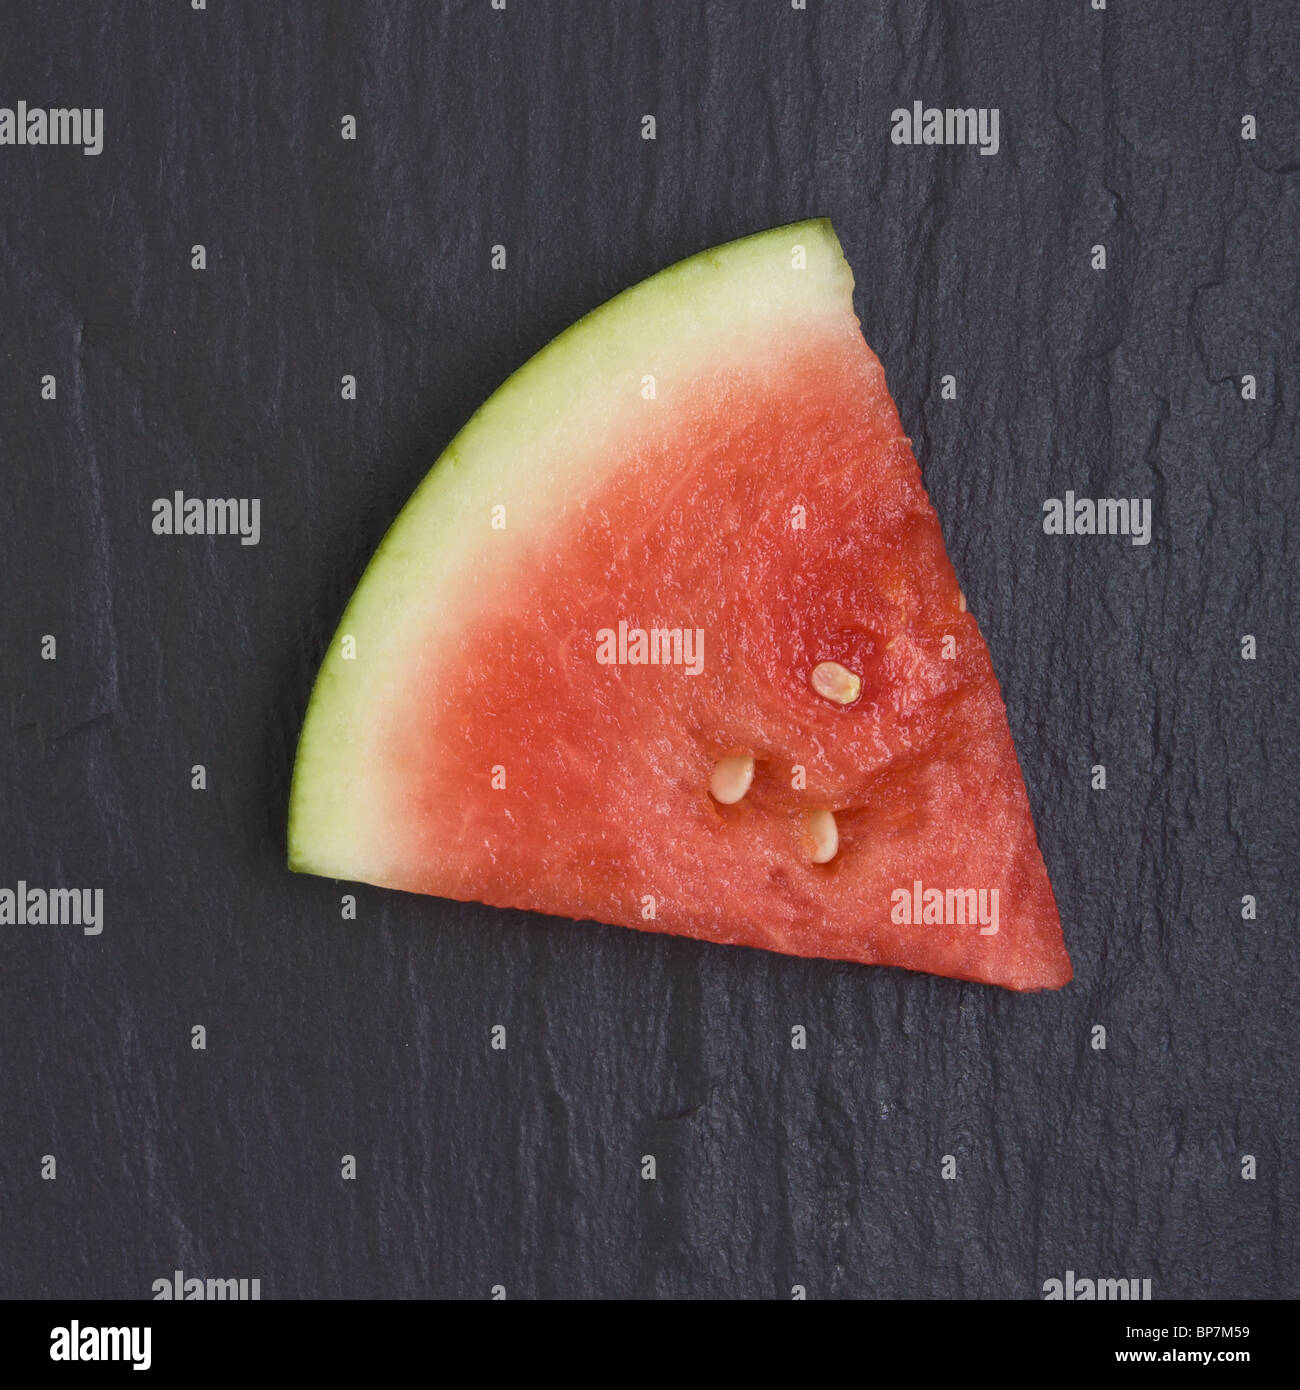 Abstract image of Watermelon segment against dark slate background. Stock Photo